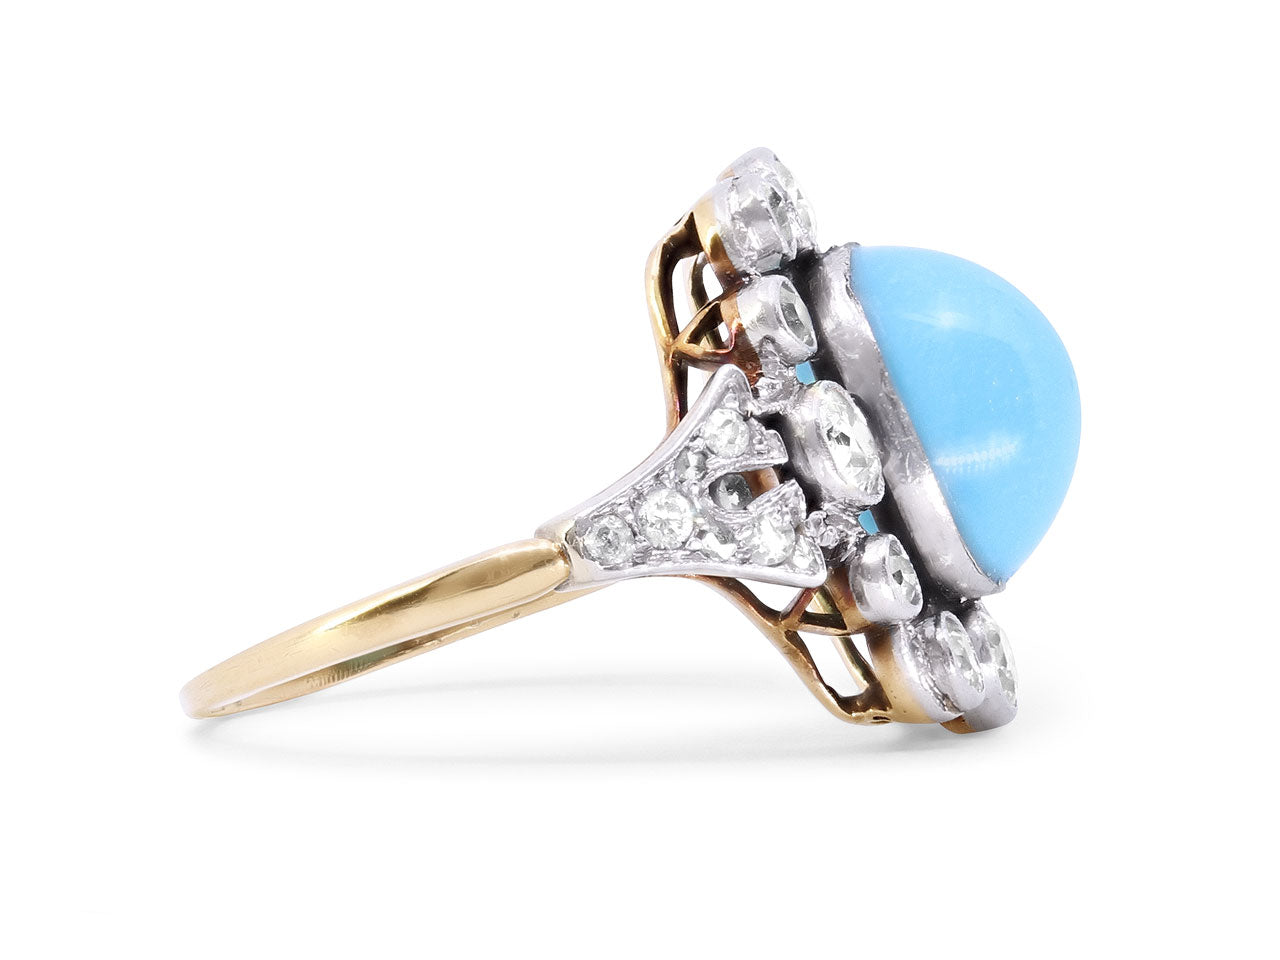 Antique Edwardian Turquoise and Diamond Ring in Platinum and 18K Gold